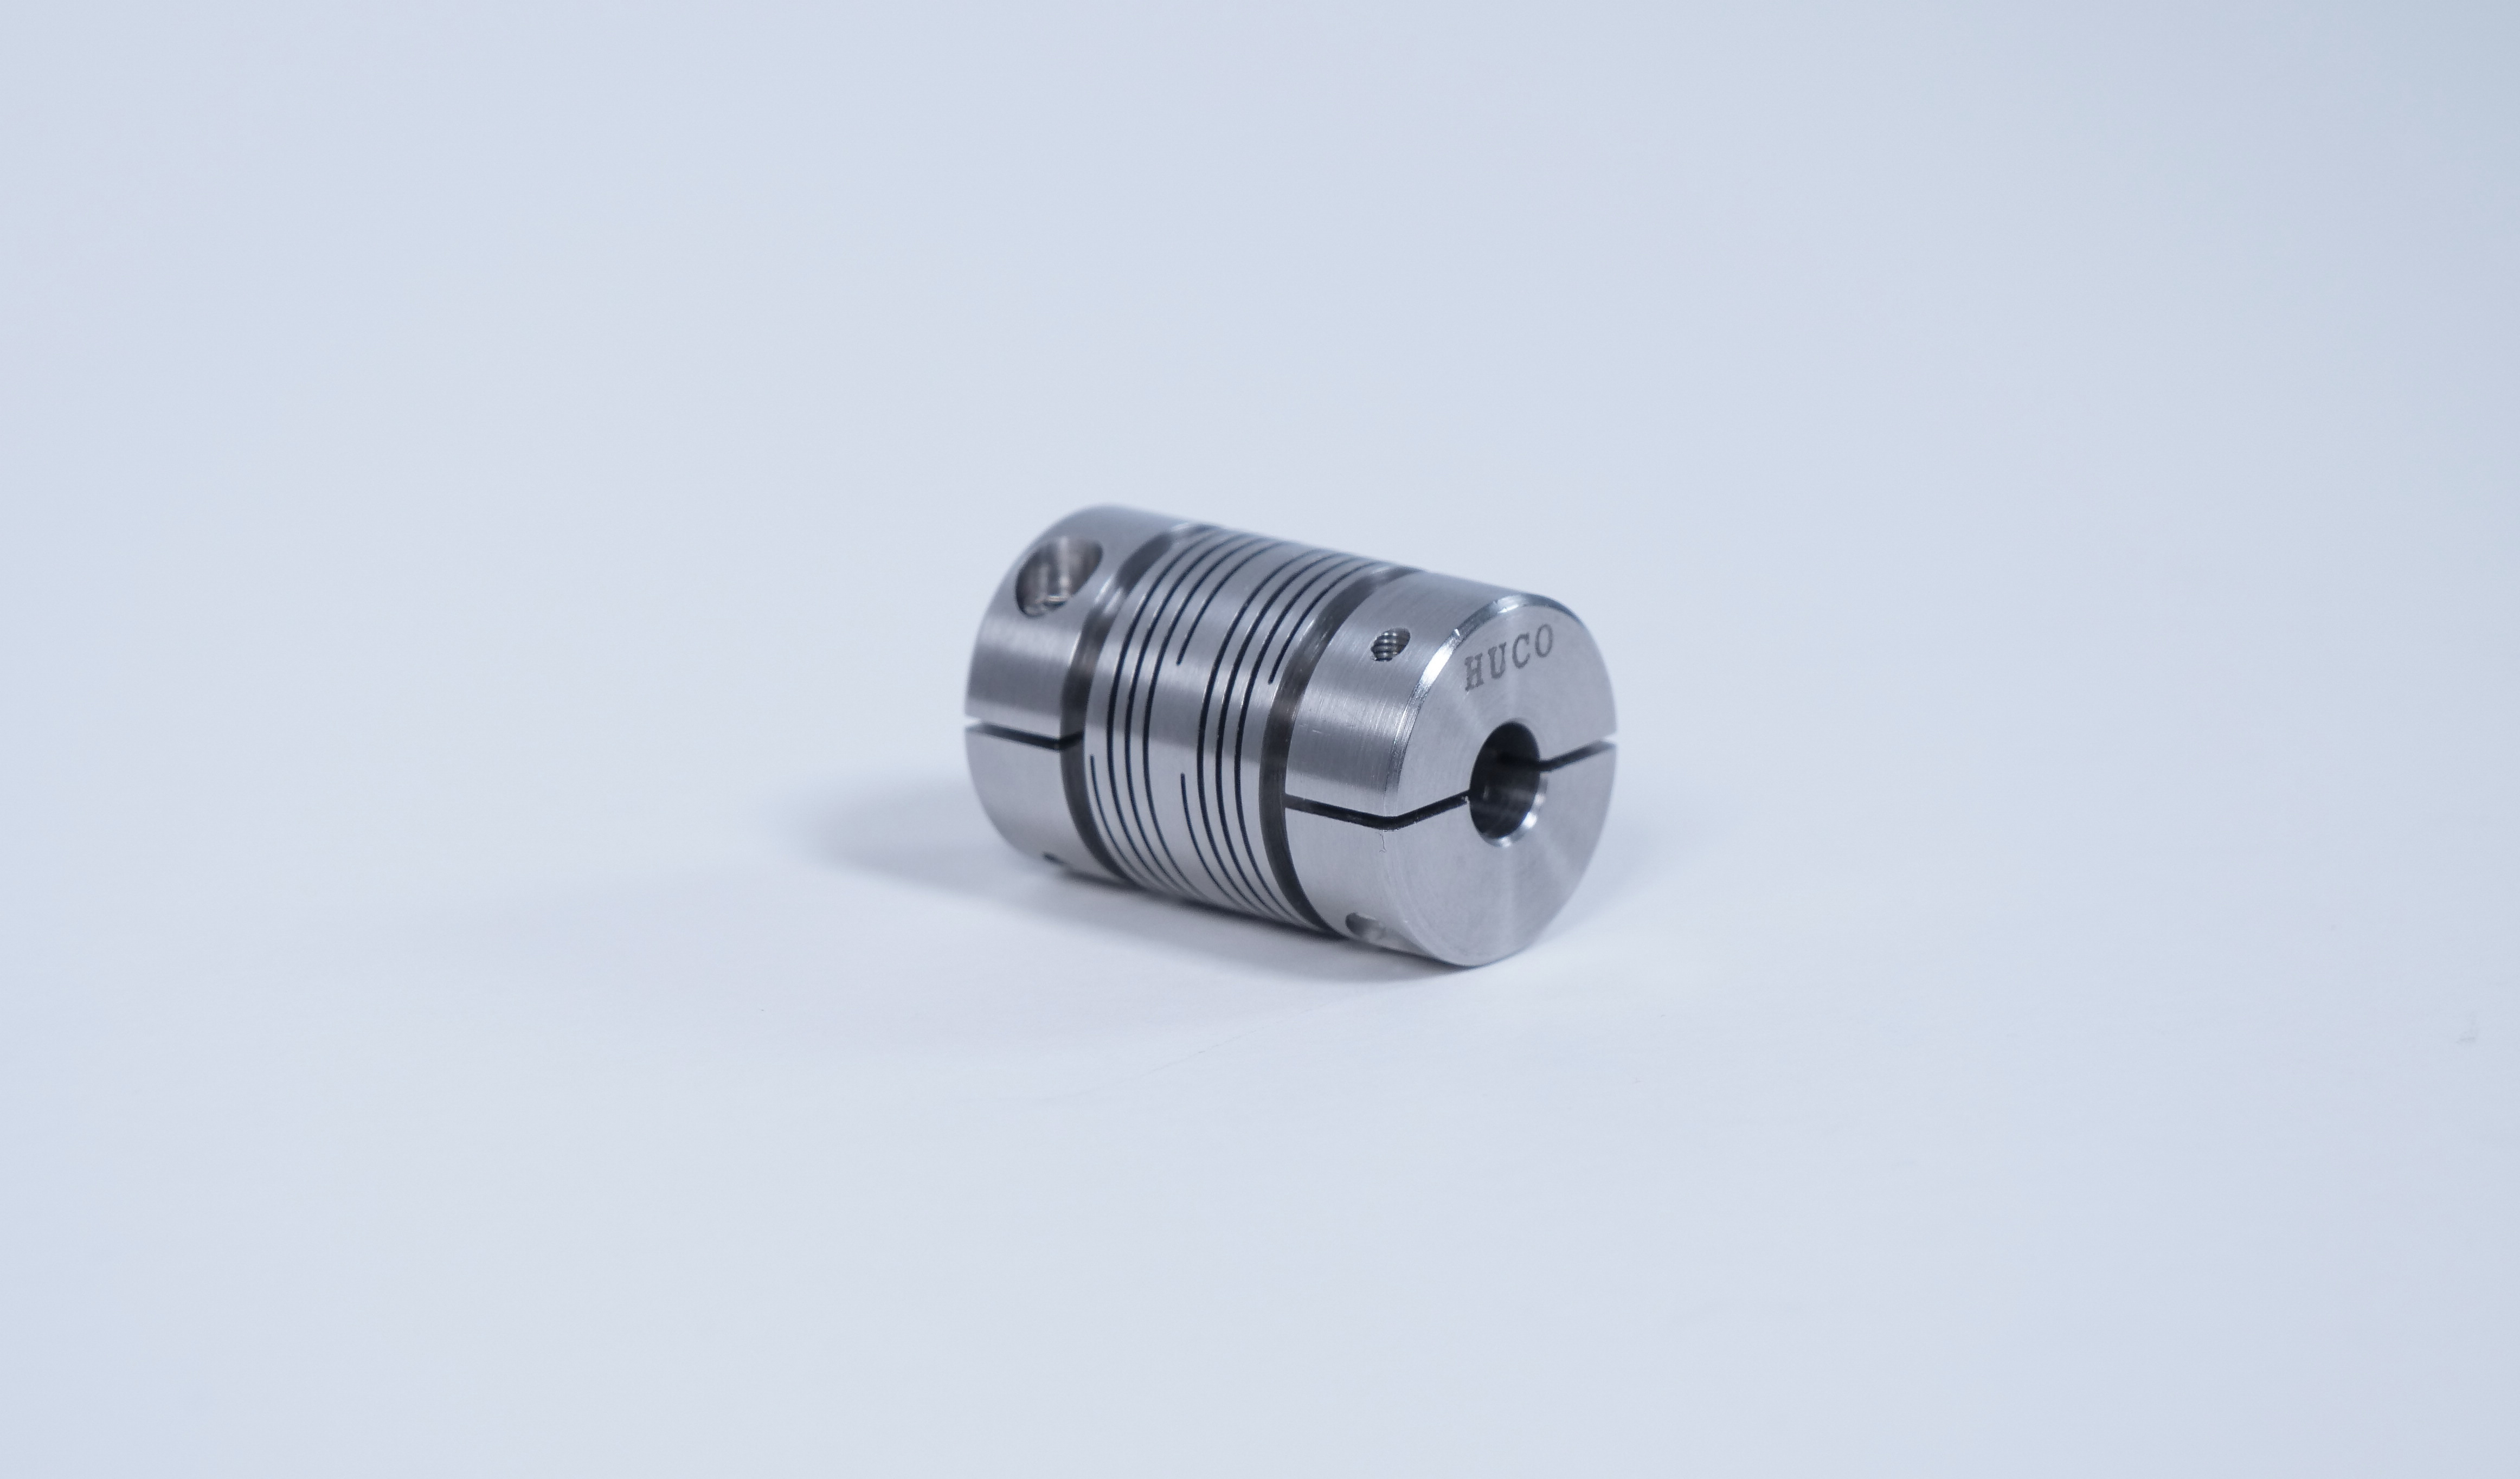 Huco offers a comprehensive range of standard and customised couplings designed for most applications